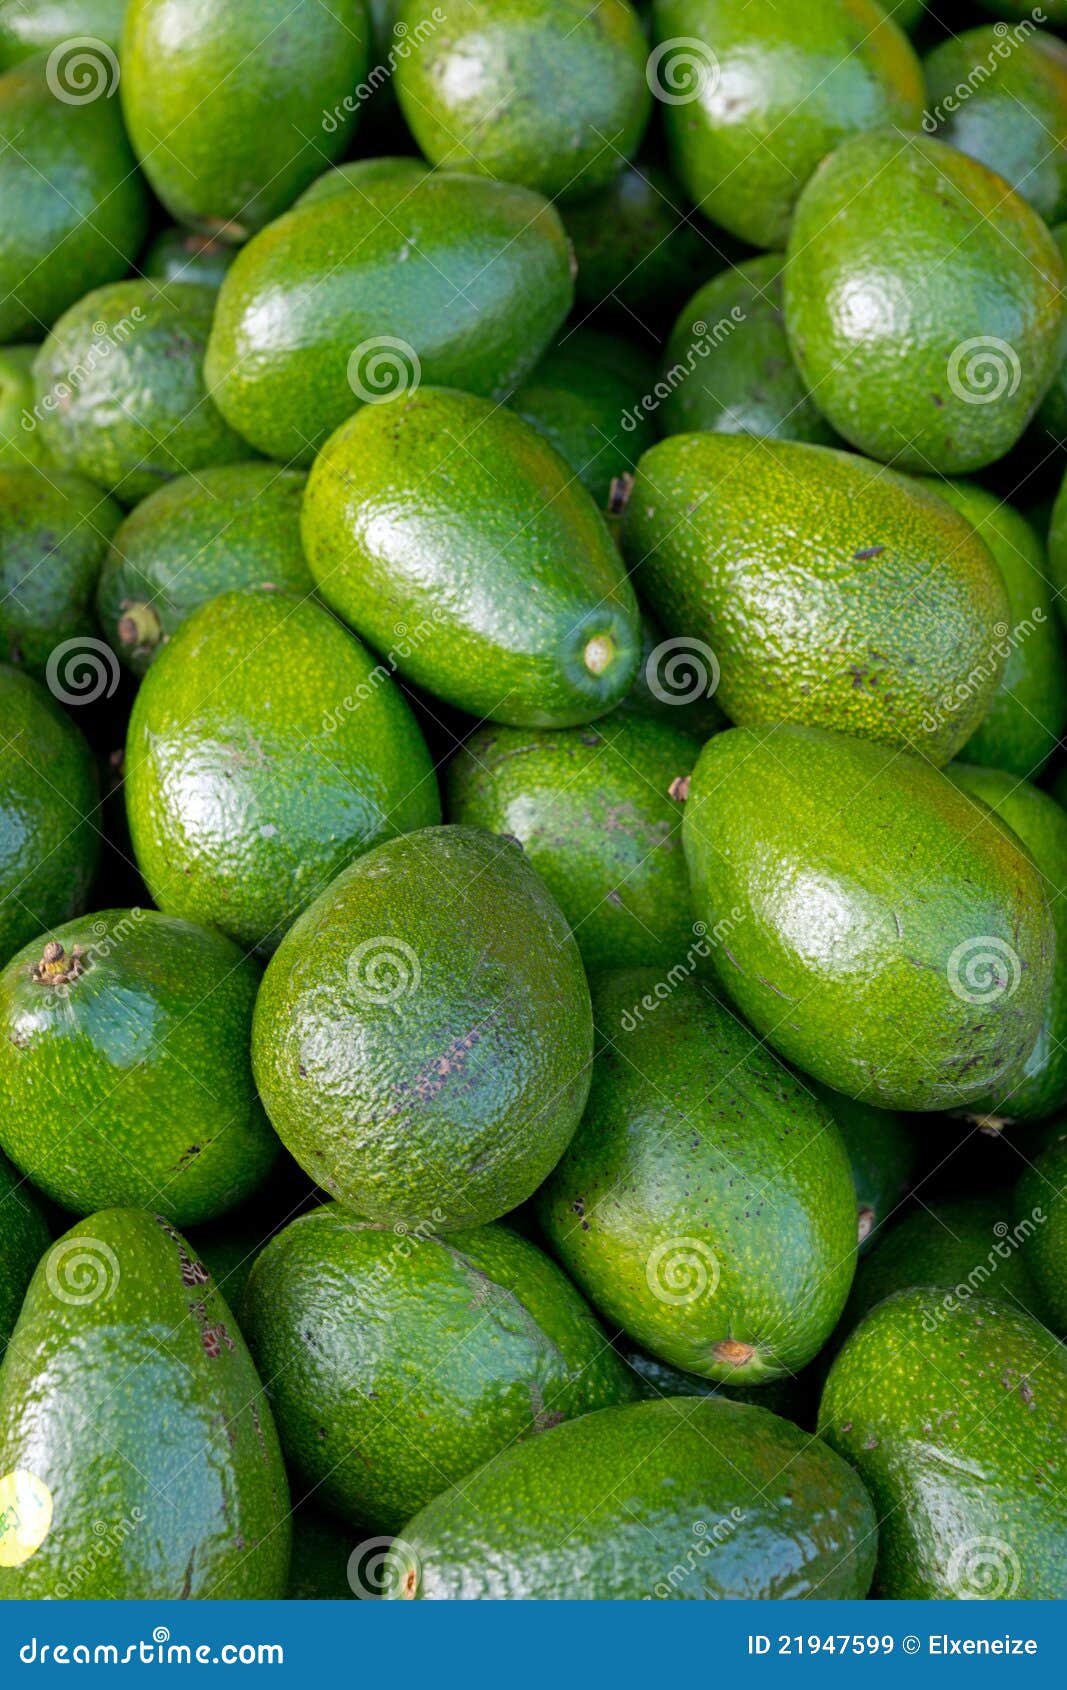 Avocados on a market stock image. Image of agriculture - 21947599